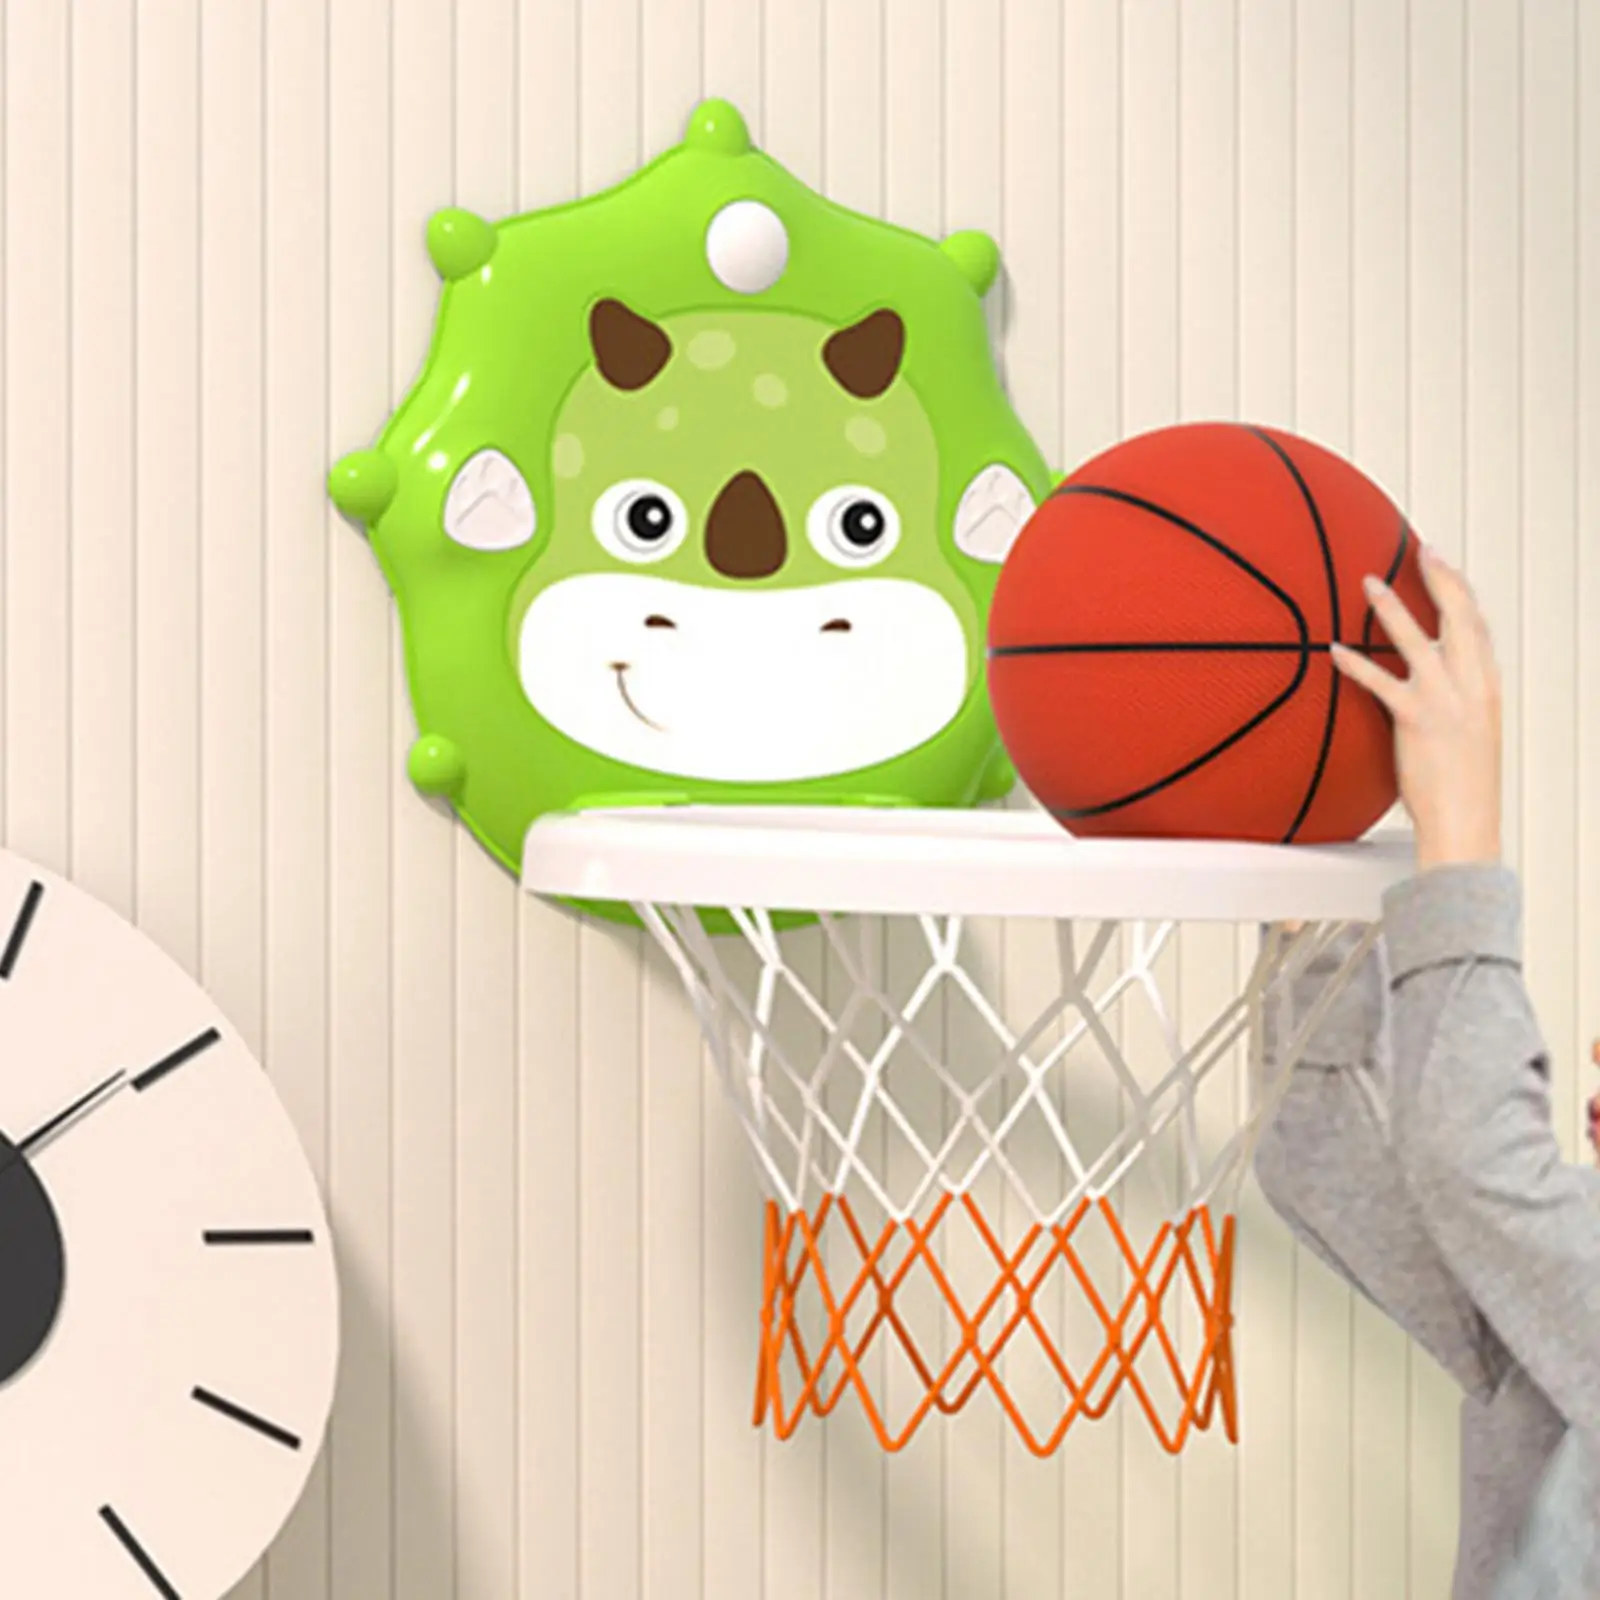 Wall Mount Basketball Toys with Balls Mini Basketball Hoop for Door Office Gifts